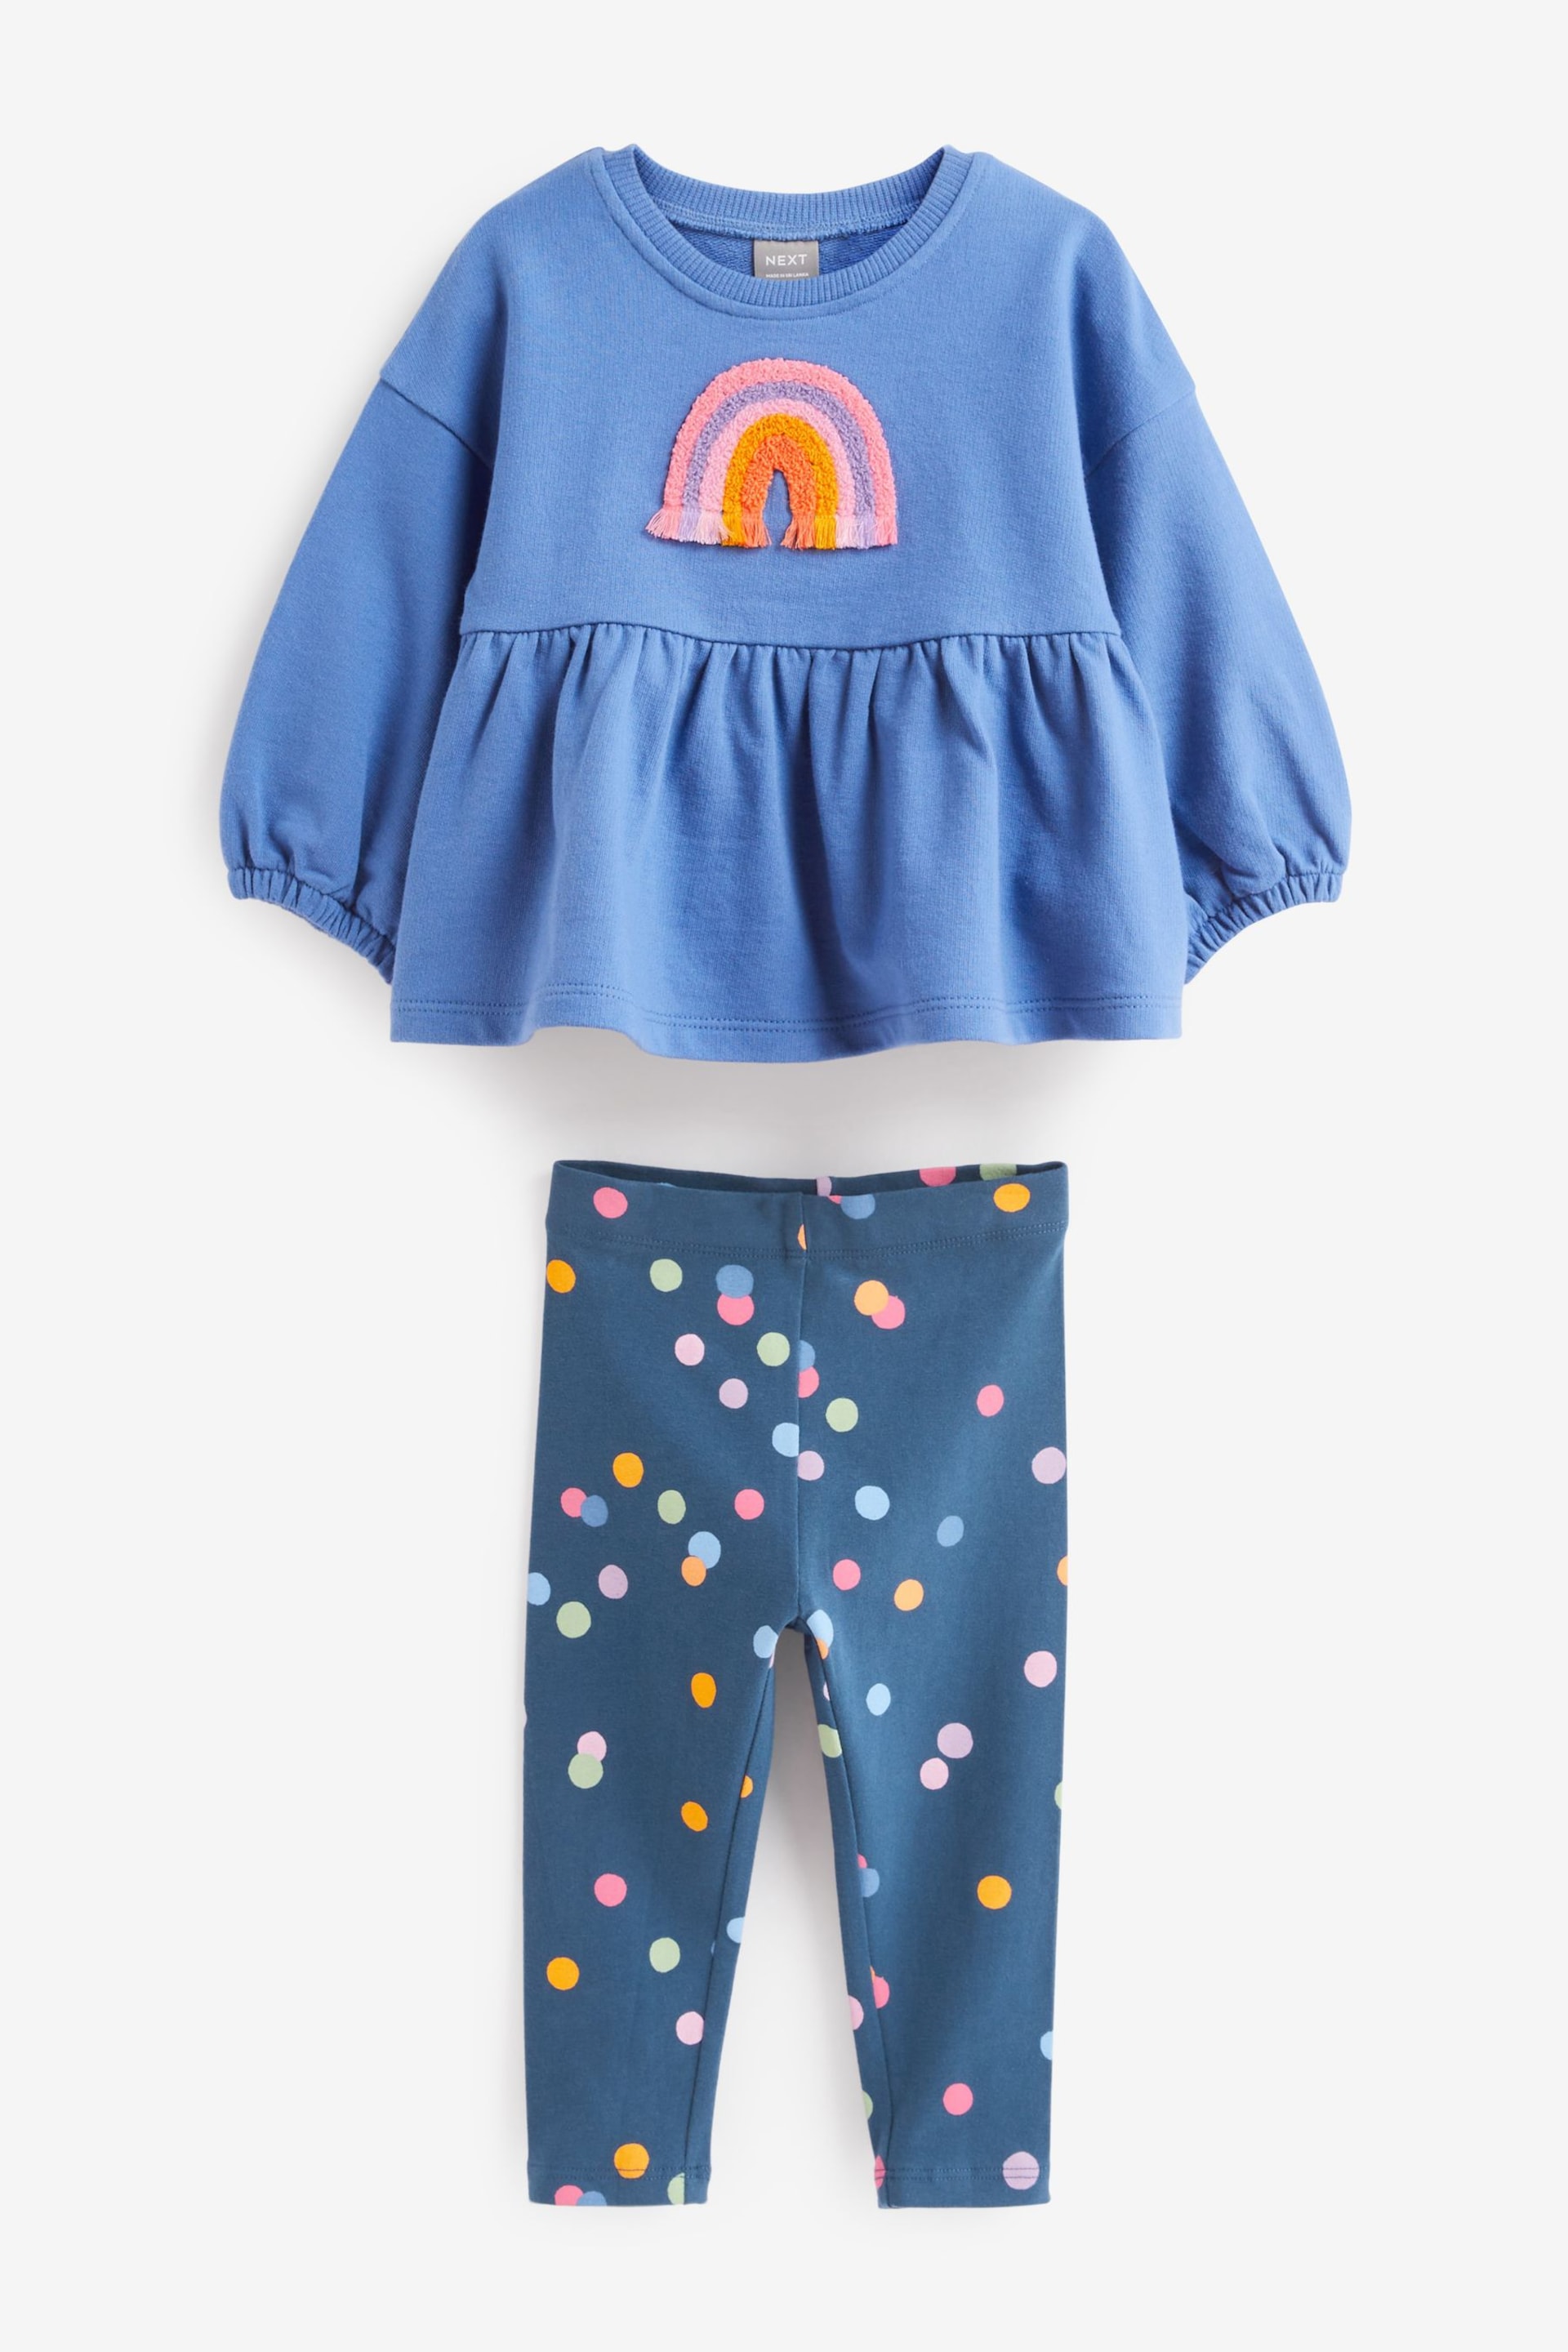 Navy Rainbow Top and Legging Set (3mths-7yrs) - Image 5 of 6